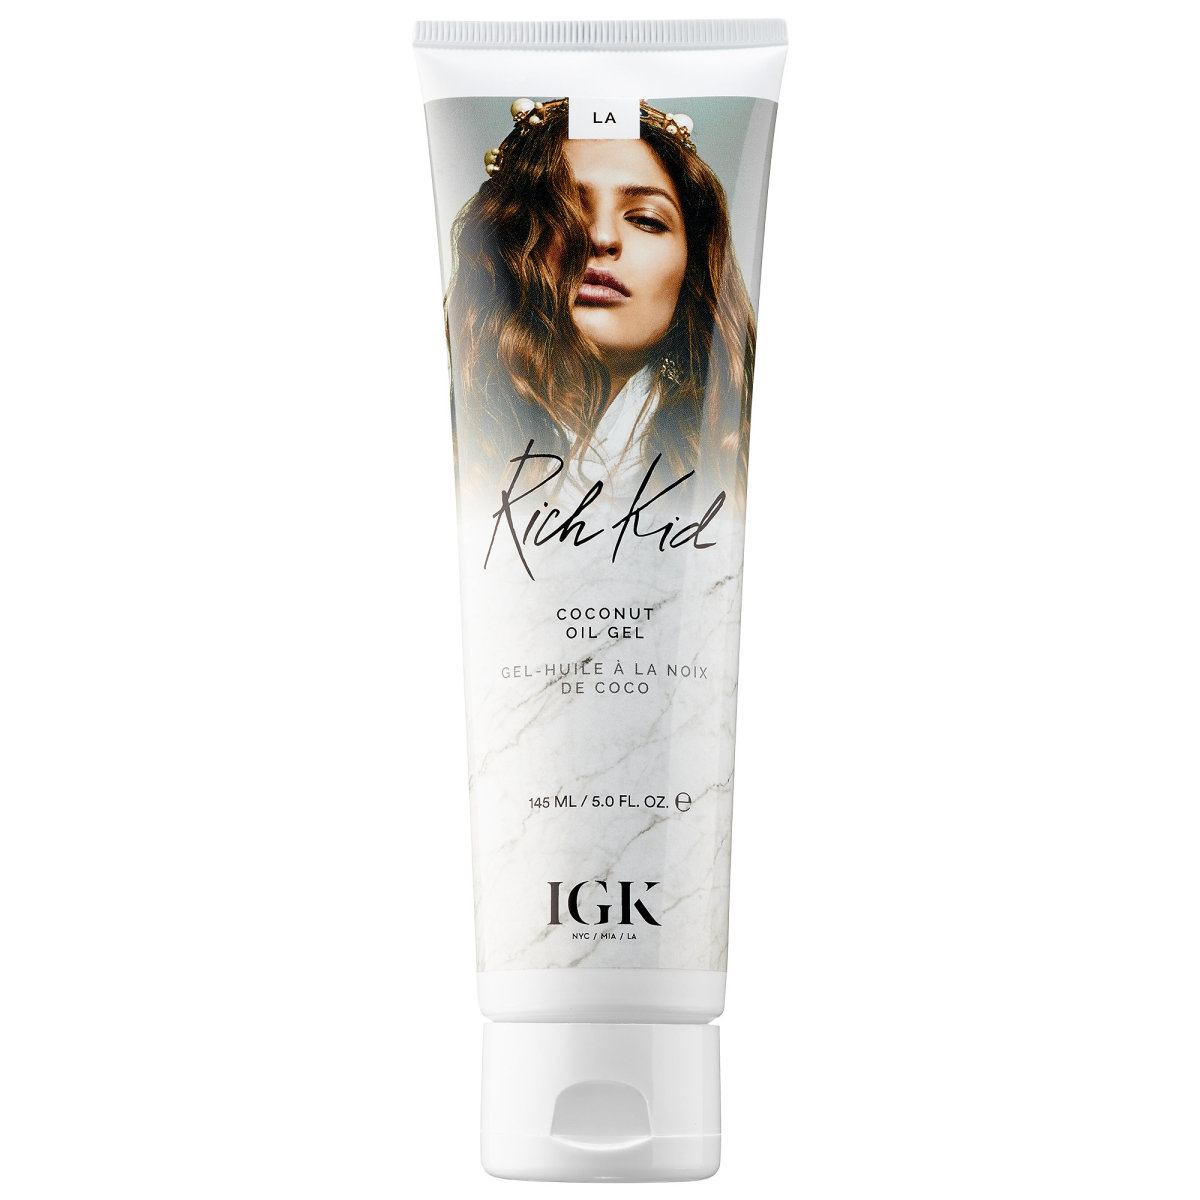 IGK Rich Kid coconut oil gel, $27, available at Sephora.